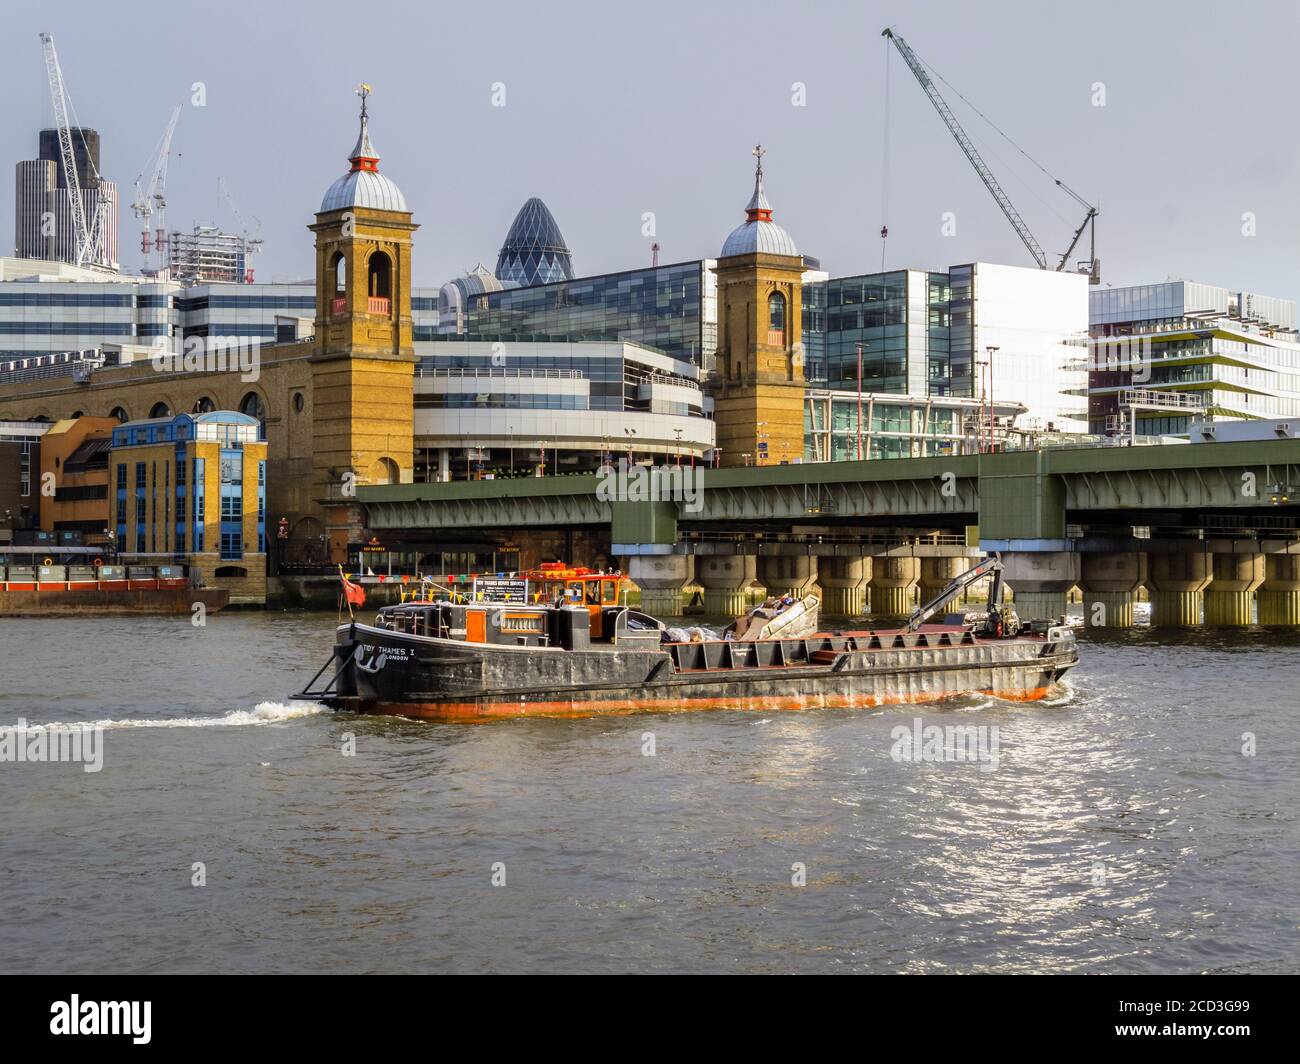 The refuse collection barge 'Tidy Thames 1' sails under the railway bridge over the River Thames at Cannon Street Station, City of London Stock Photo